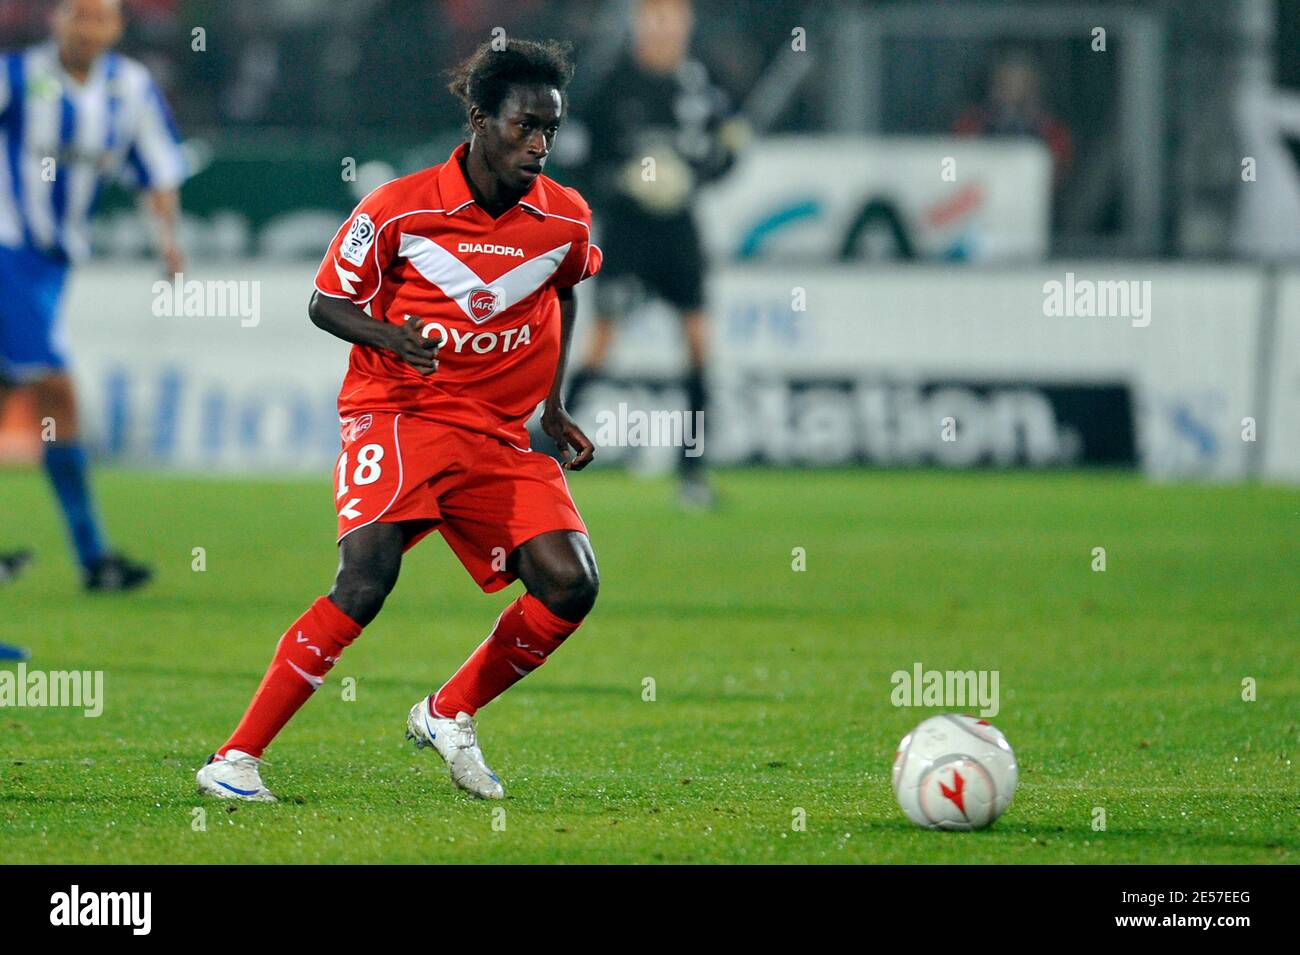 Valenciennes' Amara Karba Bangoura during the French First league soccer match, Valenciennes vs Grenoble at the Nungesser Stadium in Valenciennes, France on September 13, 2008. The match ended in a 1-1 draw. Photo by Stephane Reix/ABACAPRESS.COM Stock Photo